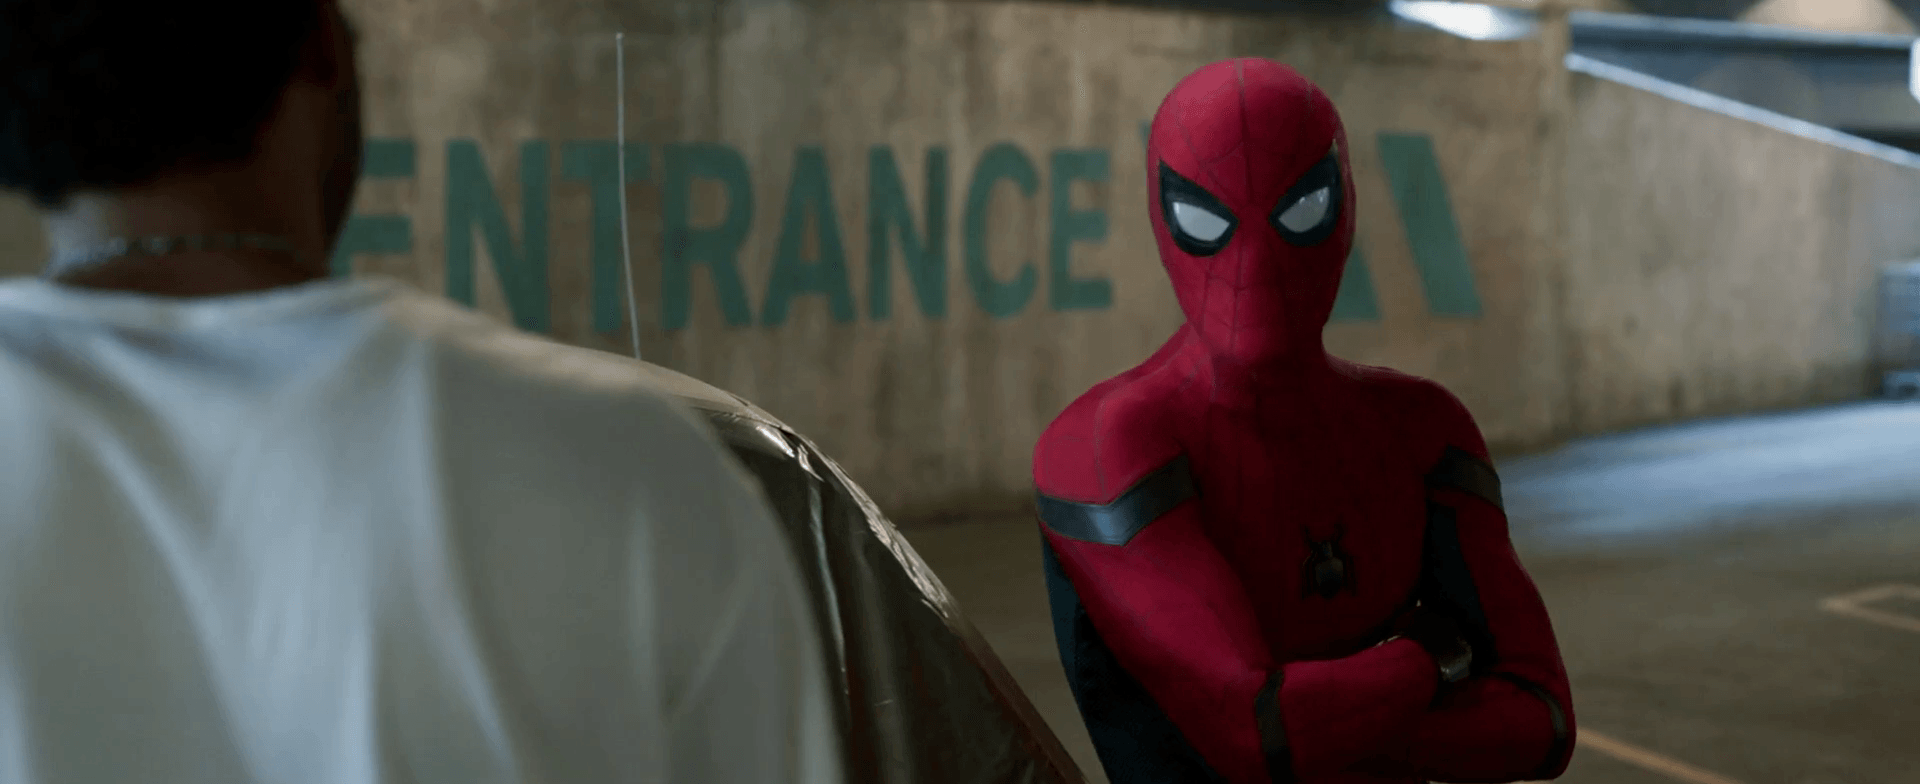 Spider-Man: Homecoming Spoiler Free Spidey Fan Review